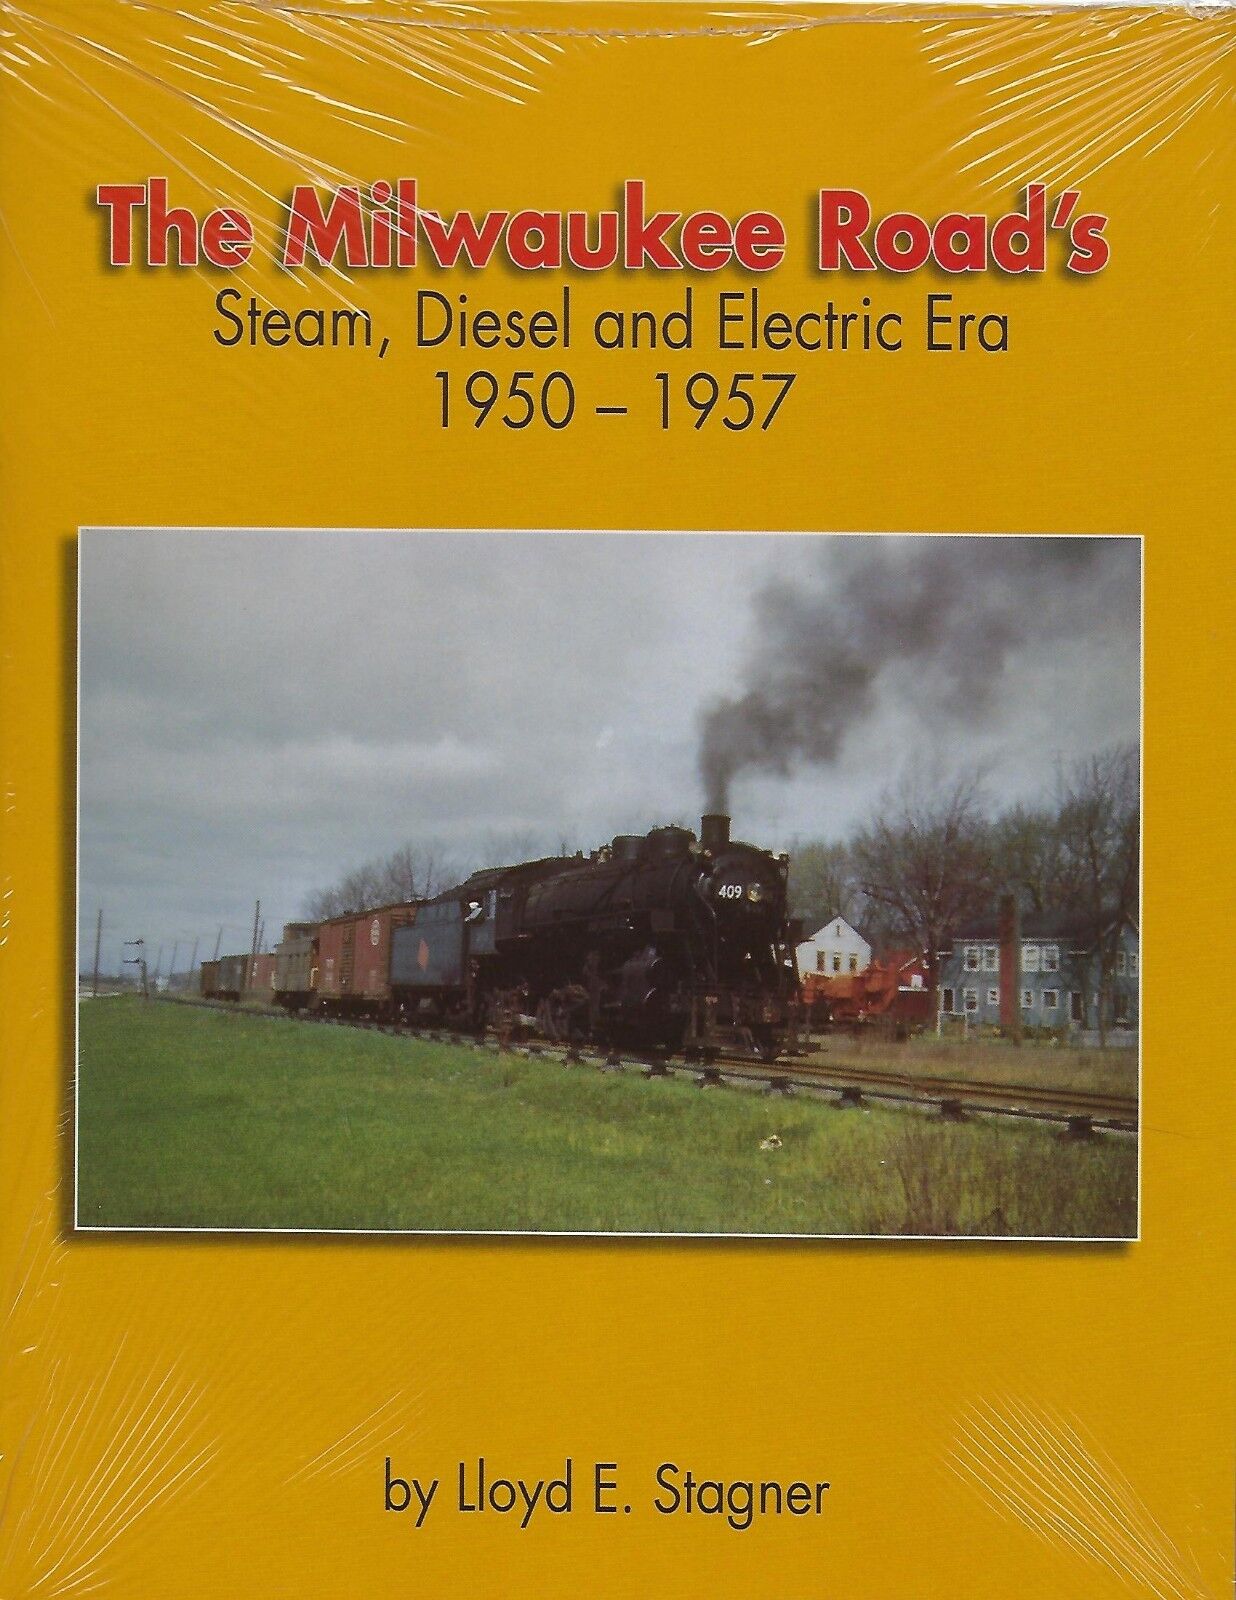 The Milwaukee Road's STEAM, DIESEL and ELECTRIC ERA, 1950-1957 (BRAND NEW BOOK)